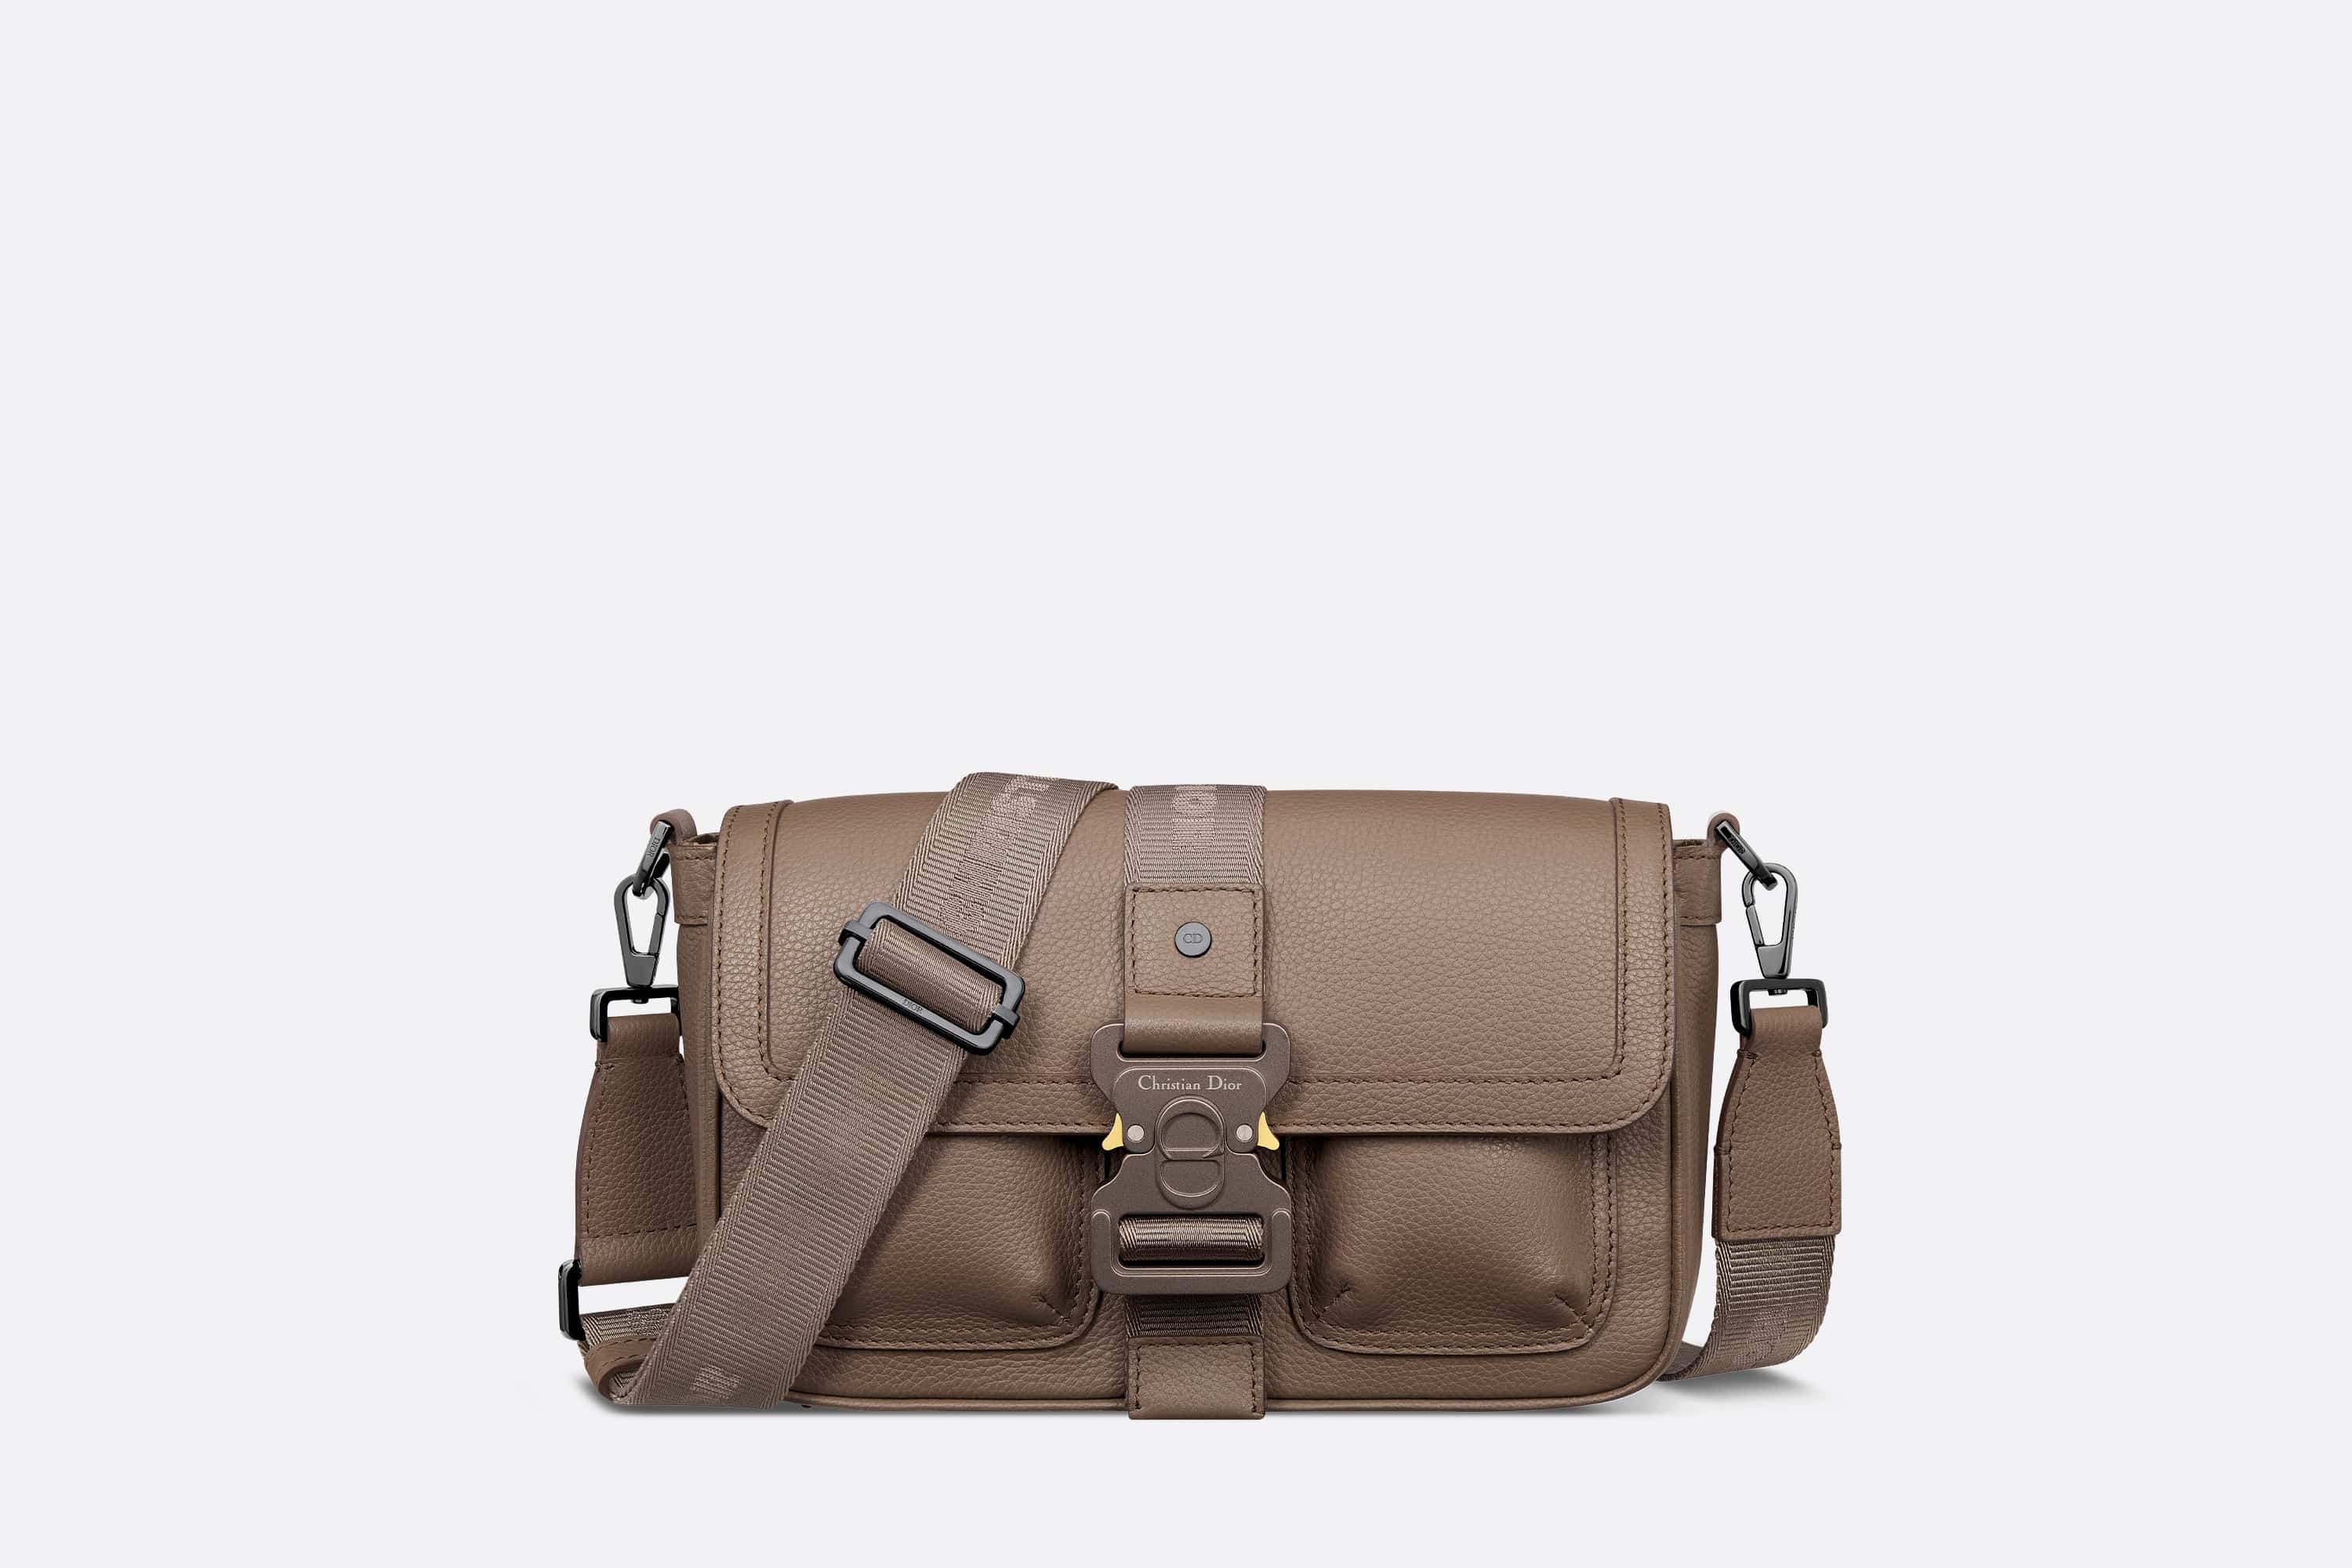 Dior Hit The Road Bag with Strap - 1